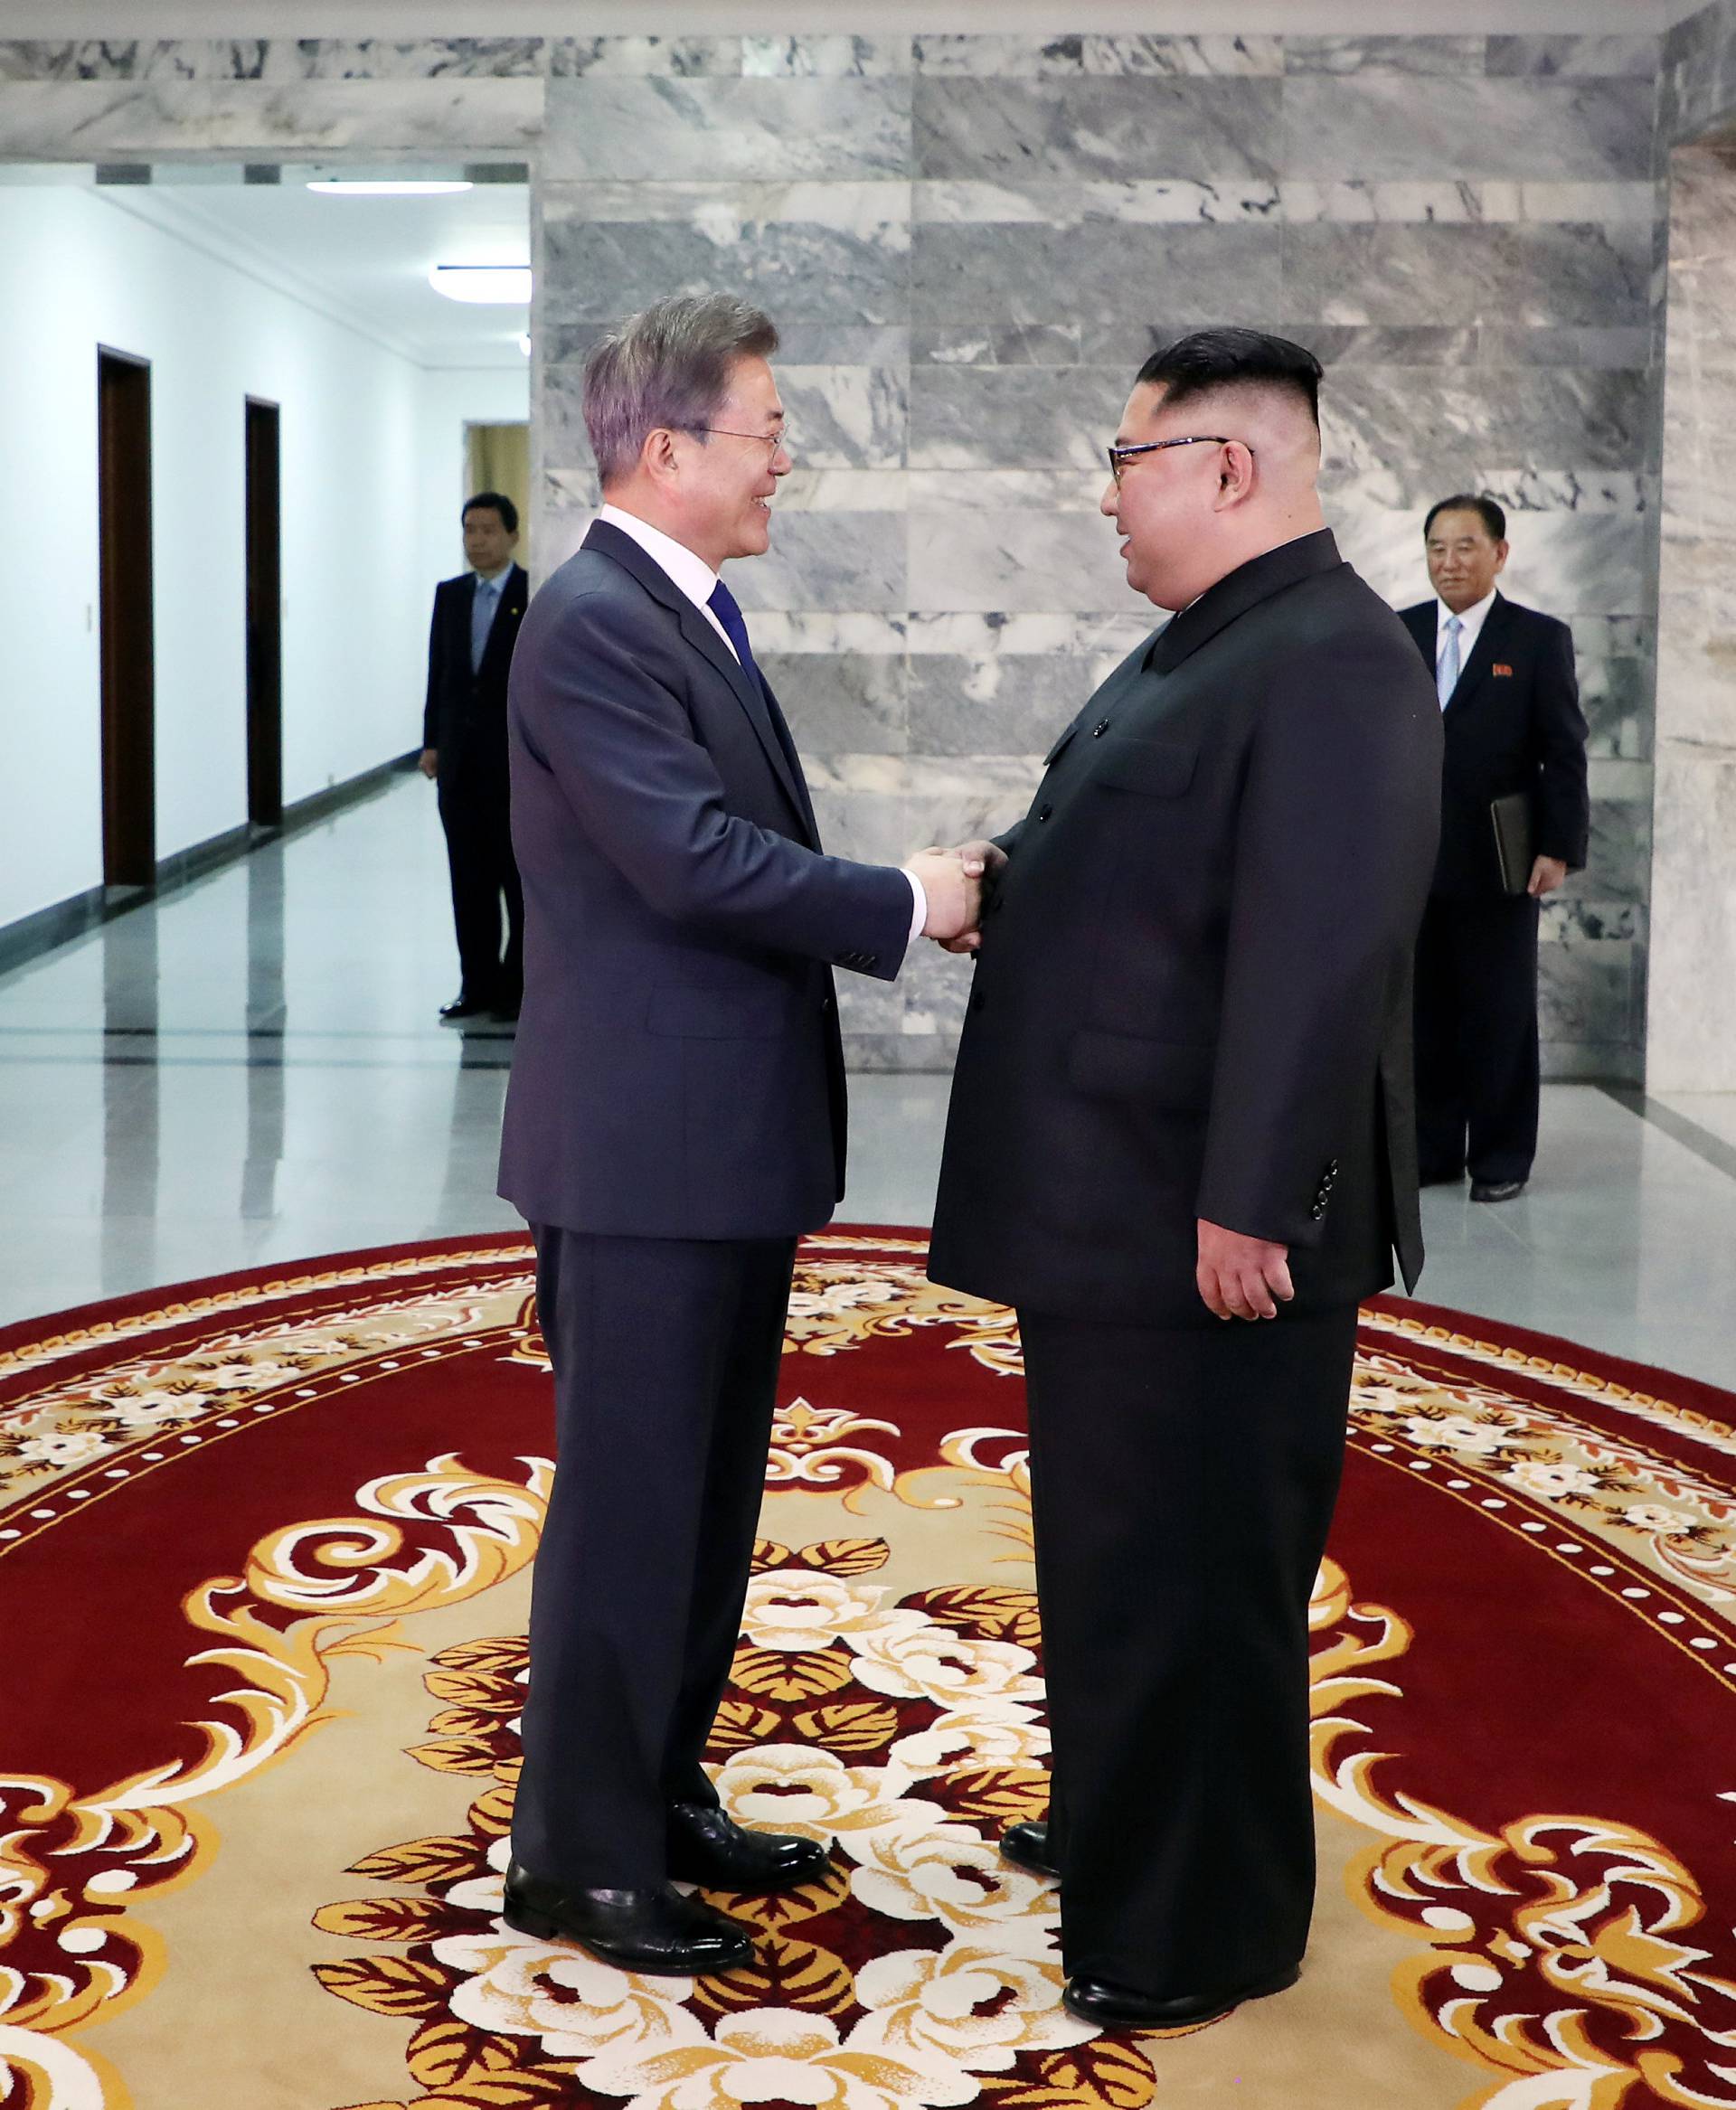 South Korean President Moon Jae-in shakes hands with North Korean leader Kim Jong Un during their summit at the truce village of Panmunjom